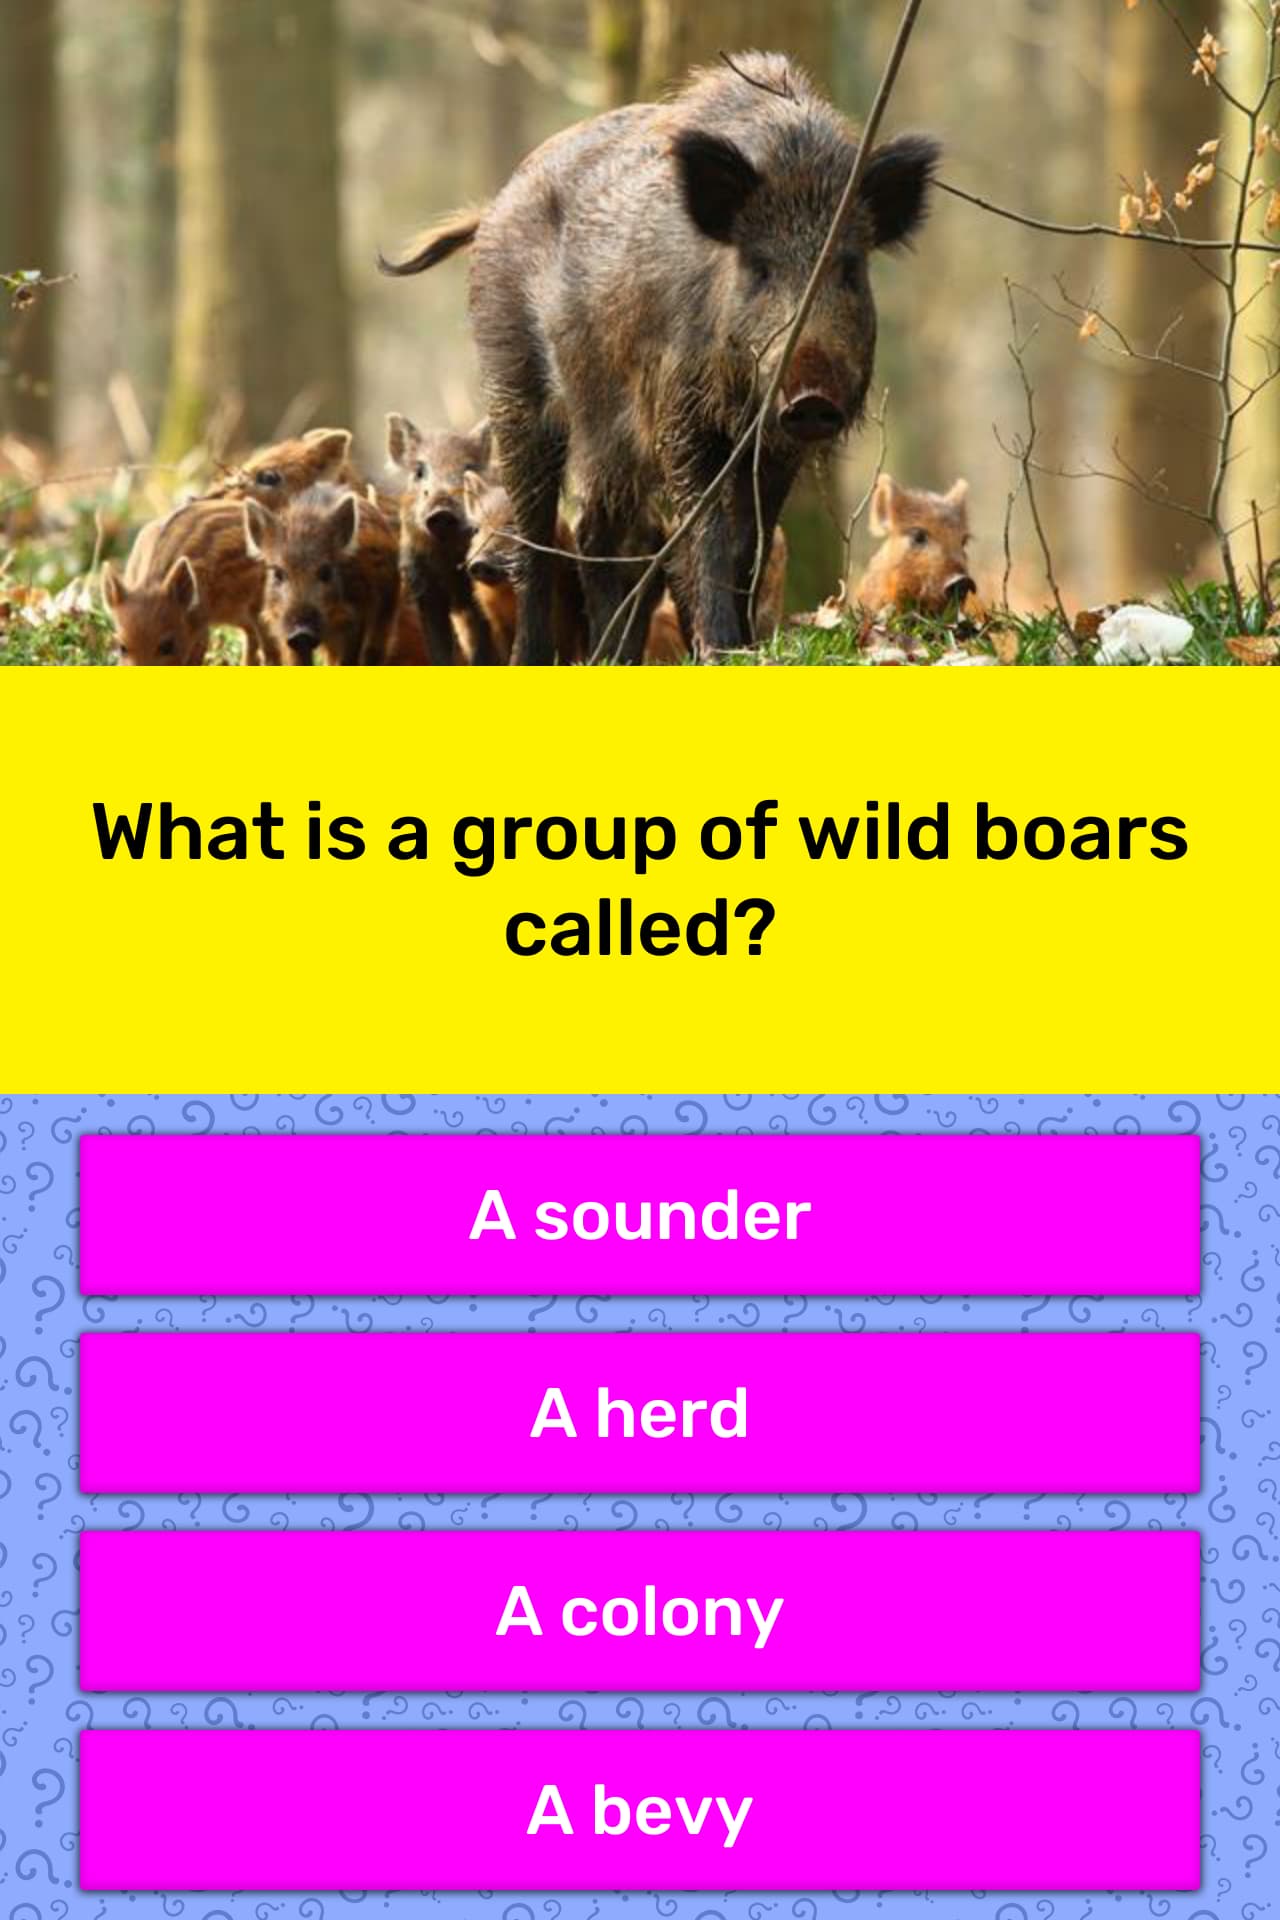 What is a group of wild boars called?